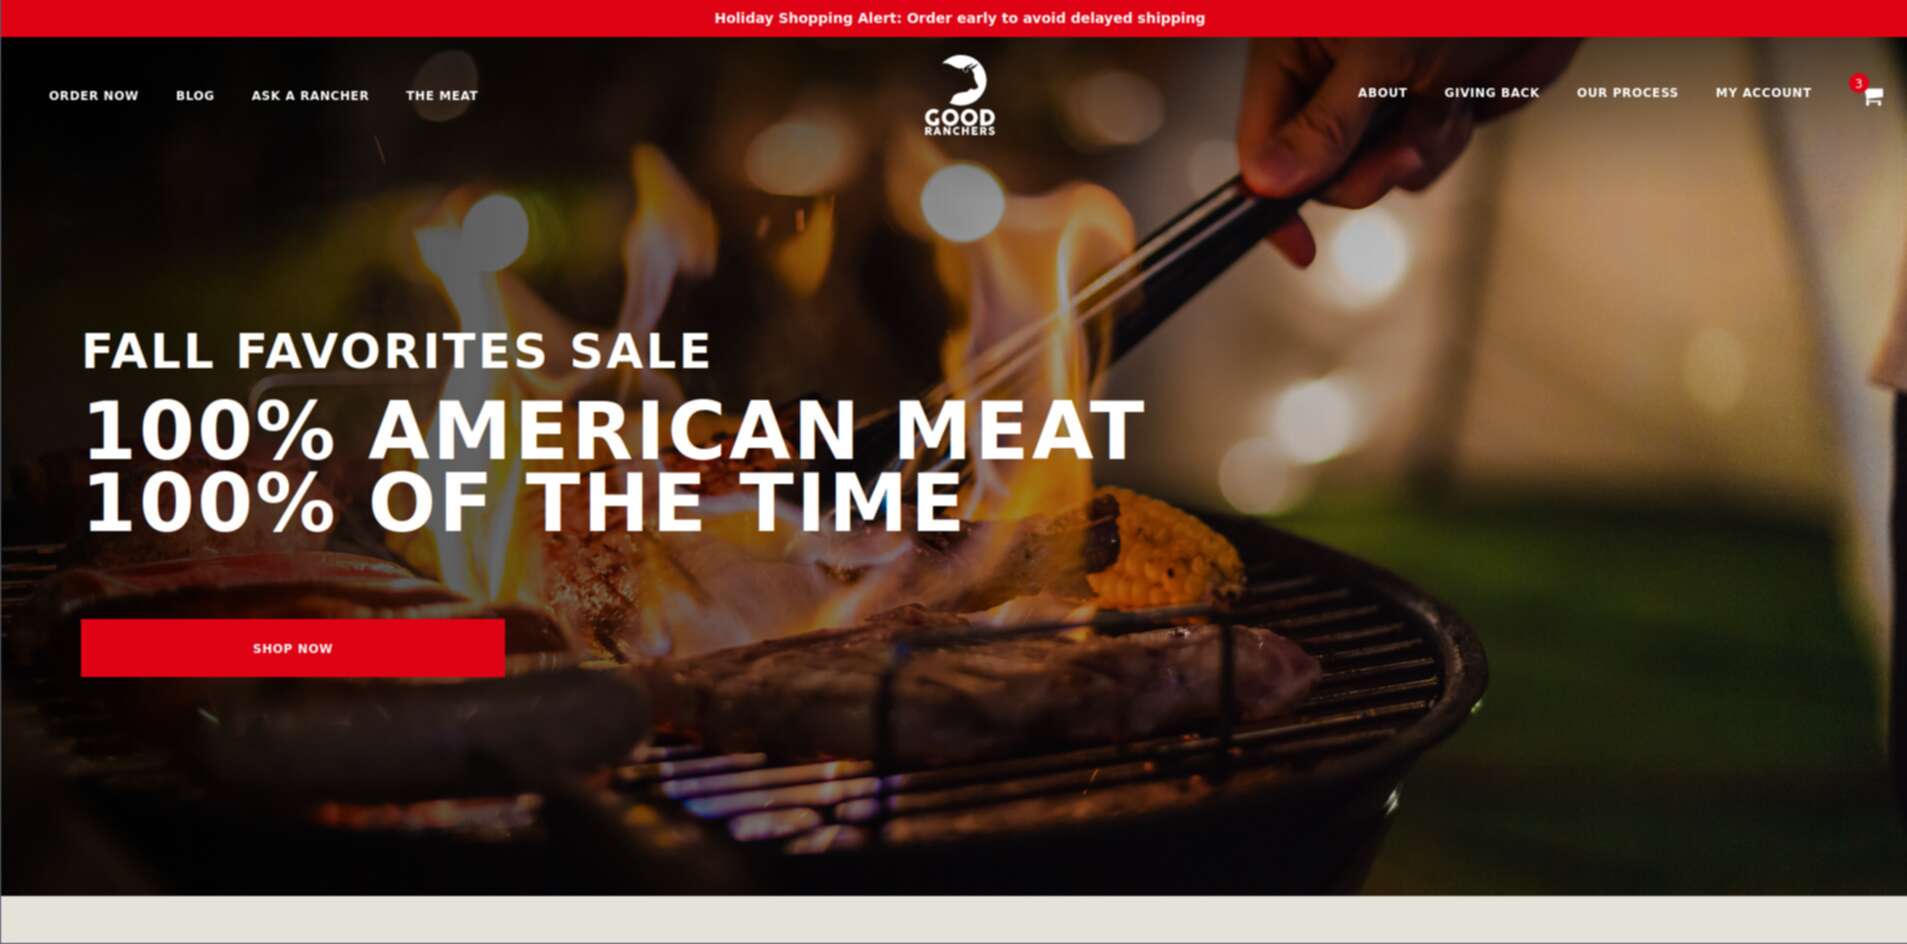 Screenshot of goodranchers.com's hero section with large background featuring close up of meat and corn grilling on a barbeque grill